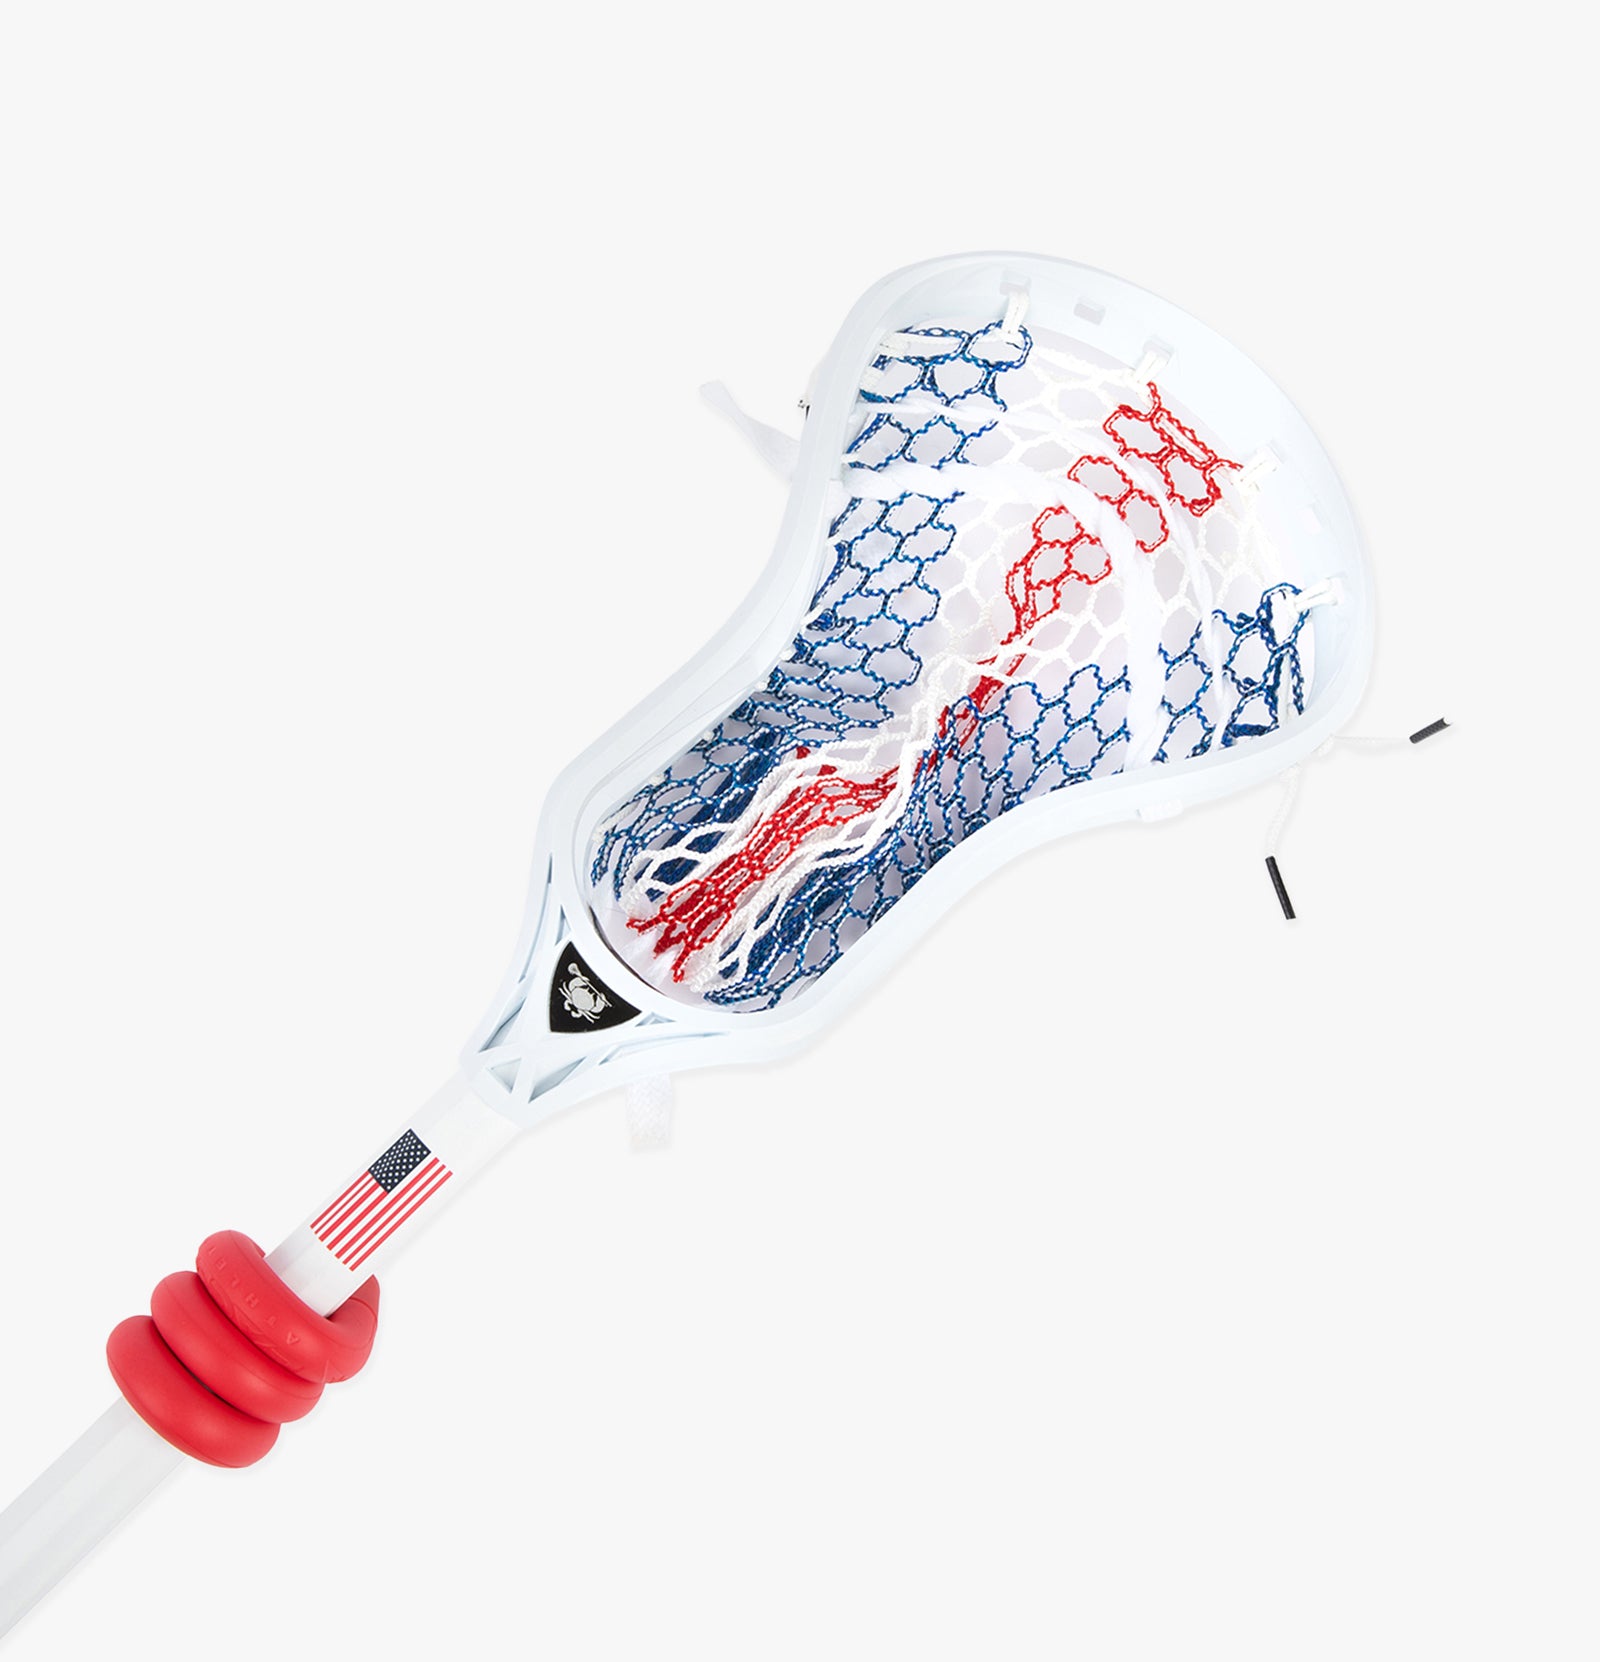 Field Hockey Lace 12oz Light Blue by Laceup Athletics